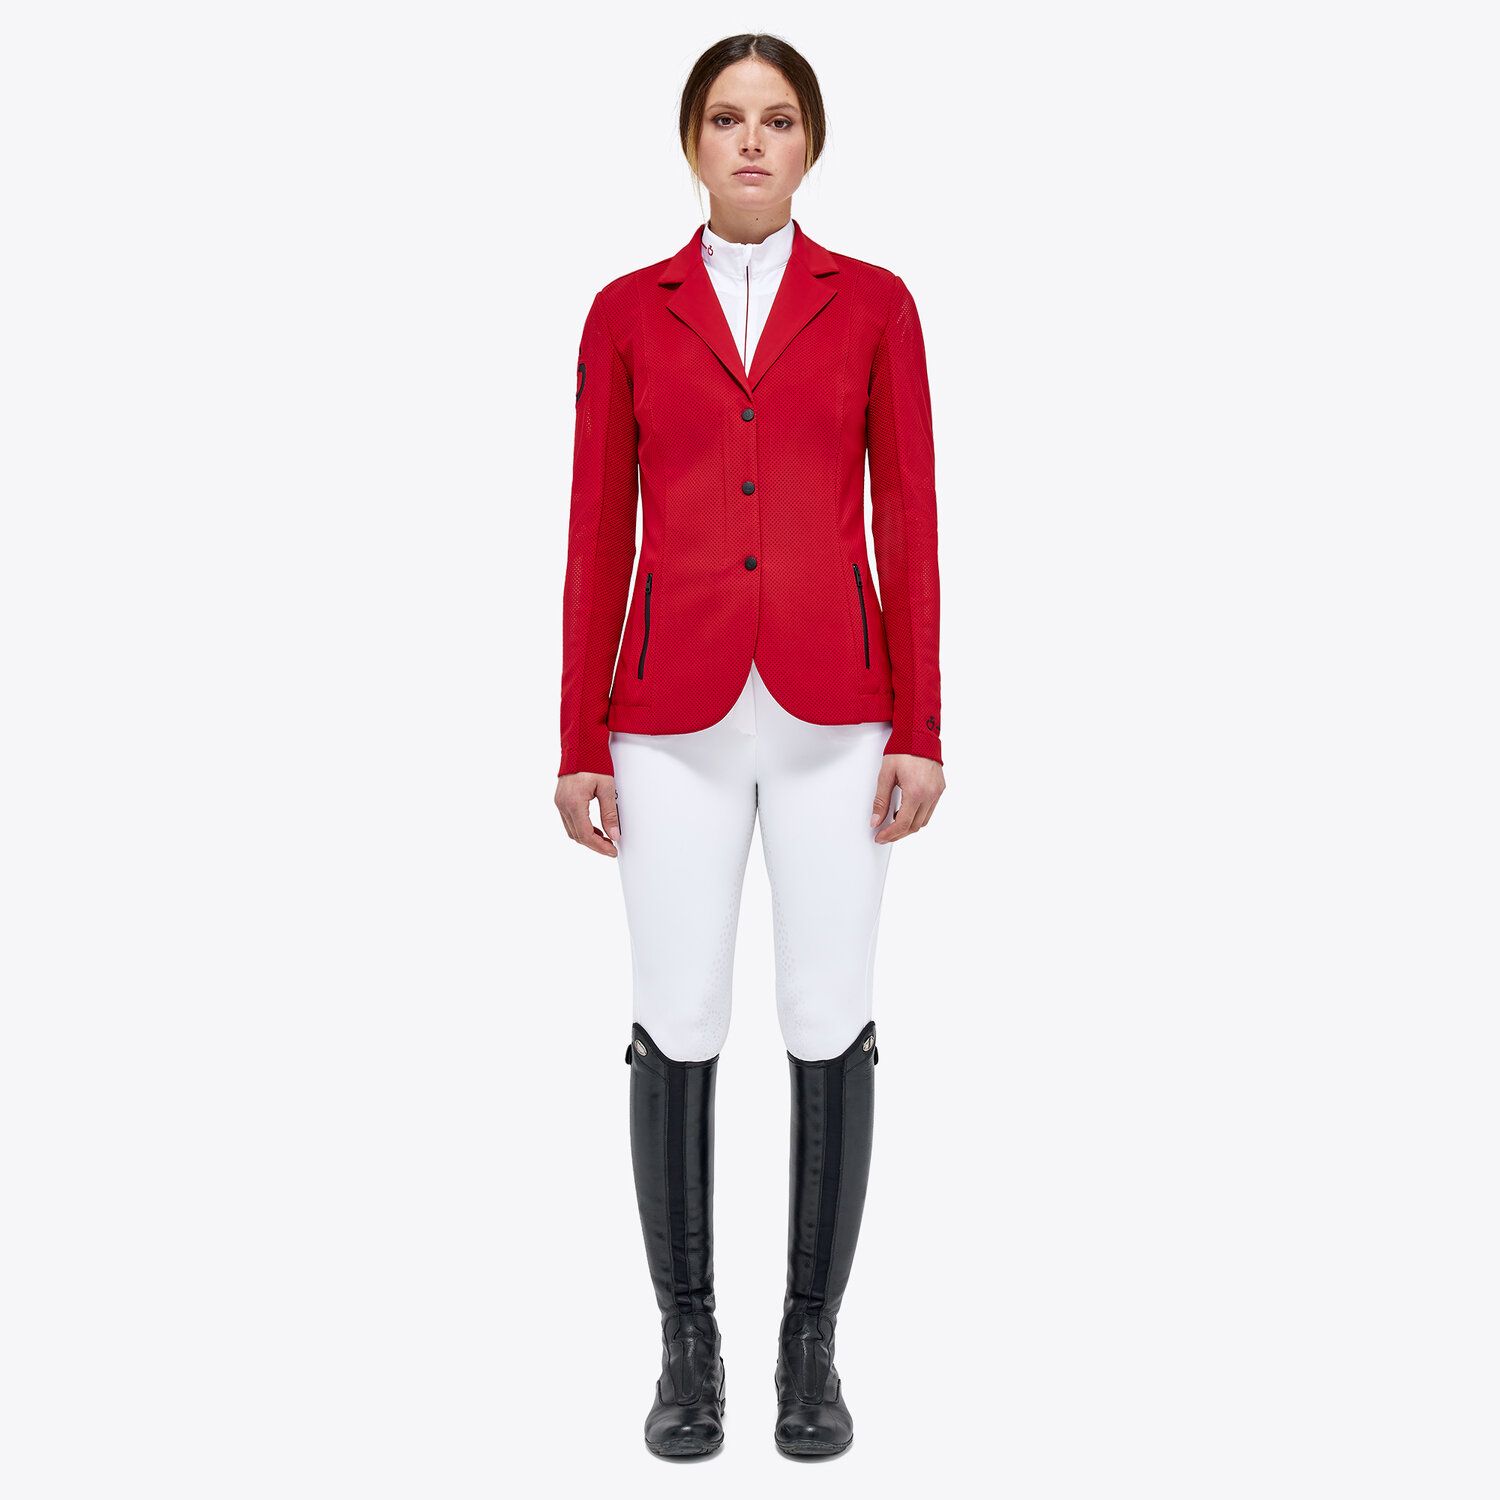 Cavalleria Toscana Women's competition riding jacket embroidery RED-1